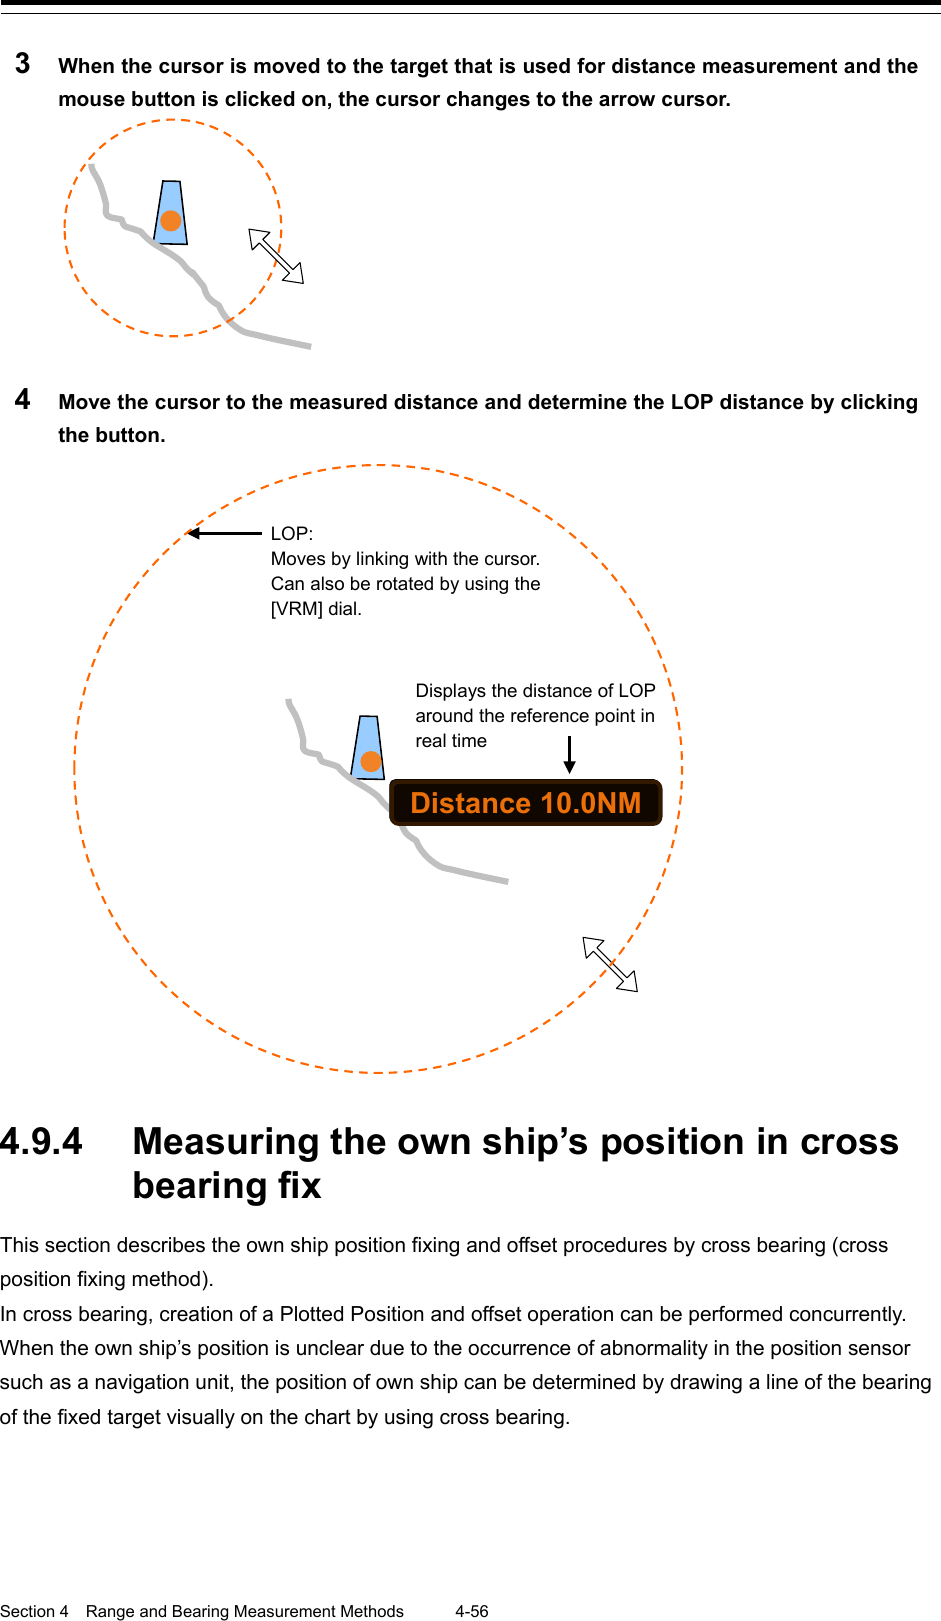  Section 4  Range and Bearing Measurement Methods 4-56  3  When the cursor is moved to the target that is used for distance measurement and the mouse button is clicked on, the cursor changes to the arrow cursor.  4  Move the cursor to the measured distance and determine the LOP distance by clicking the button.   4.9.4 Measuring the own ship’s position in cross bearing fix This section describes the own ship position fixing and offset procedures by cross bearing (cross position fixing method). In cross bearing, creation of a Plotted Position and offset operation can be performed concurrently. When the own ship’s position is unclear due to the occurrence of abnormality in the position sensor such as a navigation unit, the position of own ship can be determined by drawing a line of the bearing of the fixed target visually on the chart by using cross bearing.      LOP: Moves by linking with the cursor. Can also be rotated by using the [VRM] dial. Displays the distance of LOP around the reference point in real time    Disatance 10.0NMDistance 10.0NM 